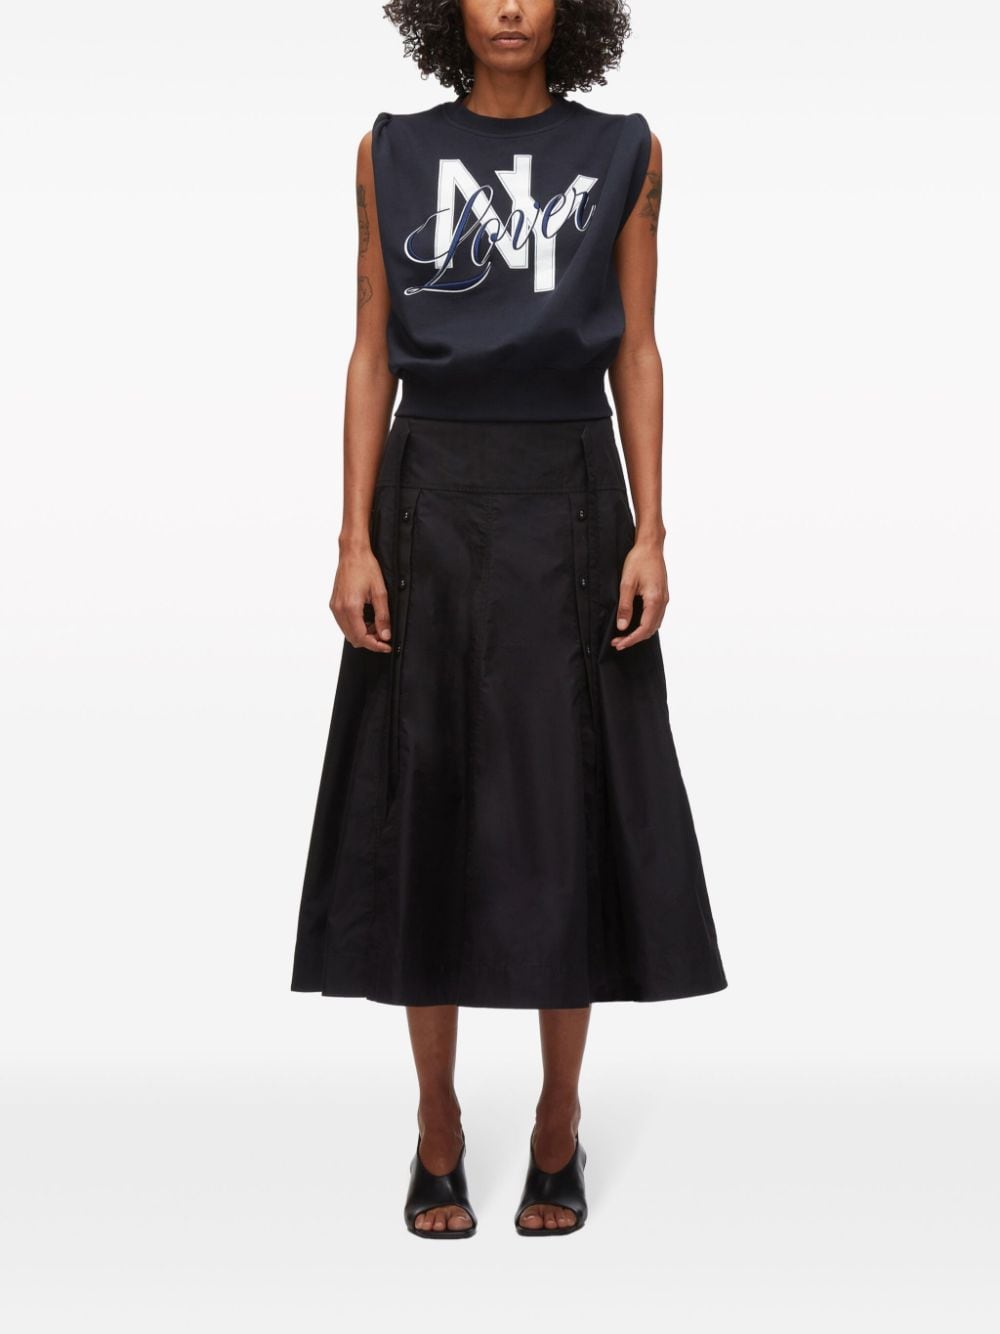 Image 2 of 3.1 Phillip Lim NY Lover jersey tank top